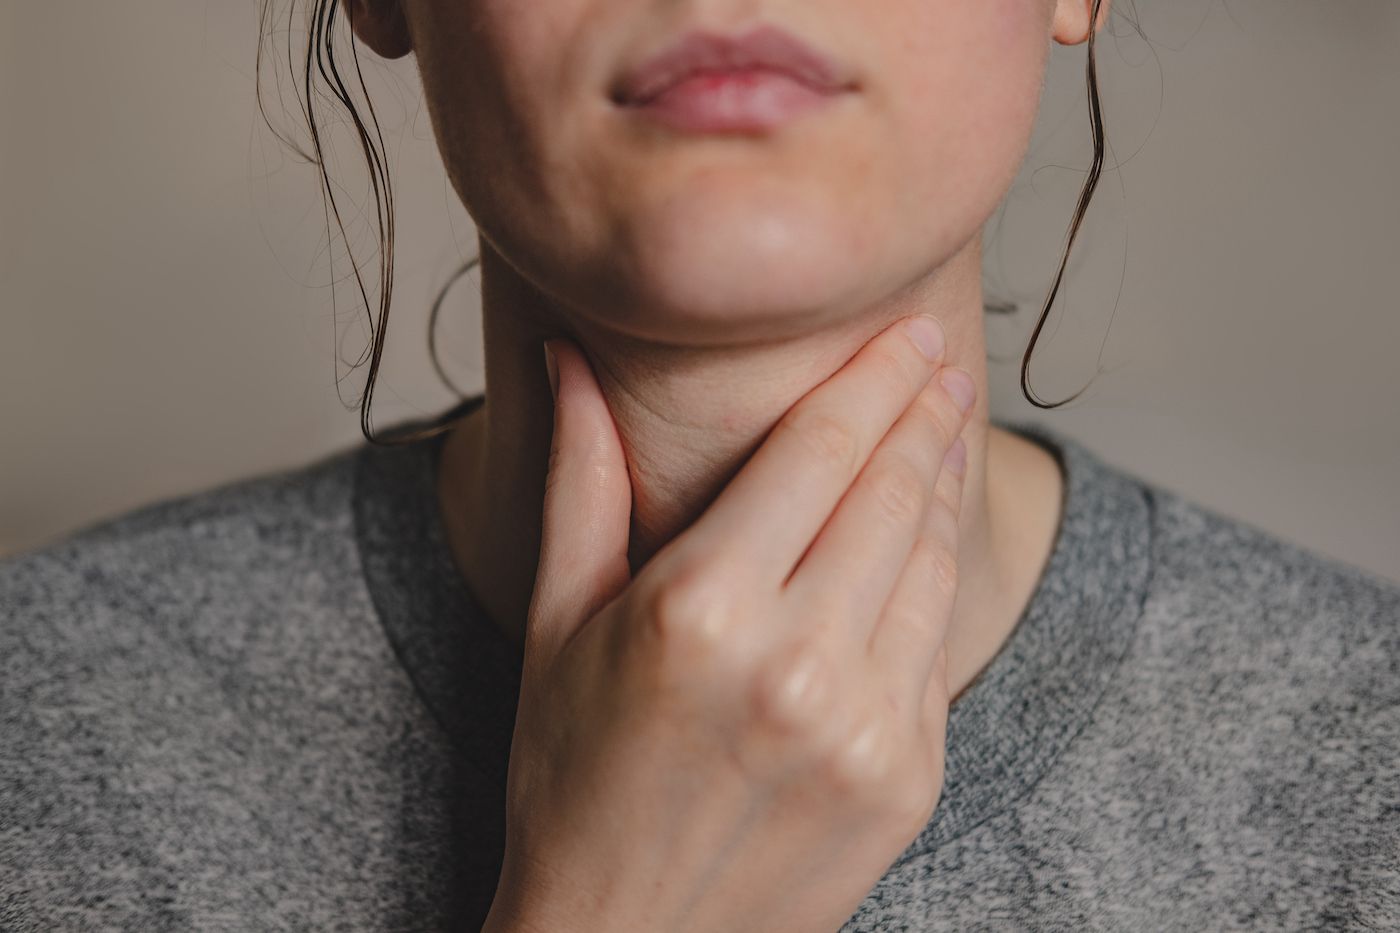 If you’ve got a sore throat, get tested for COVID-19. GETTY